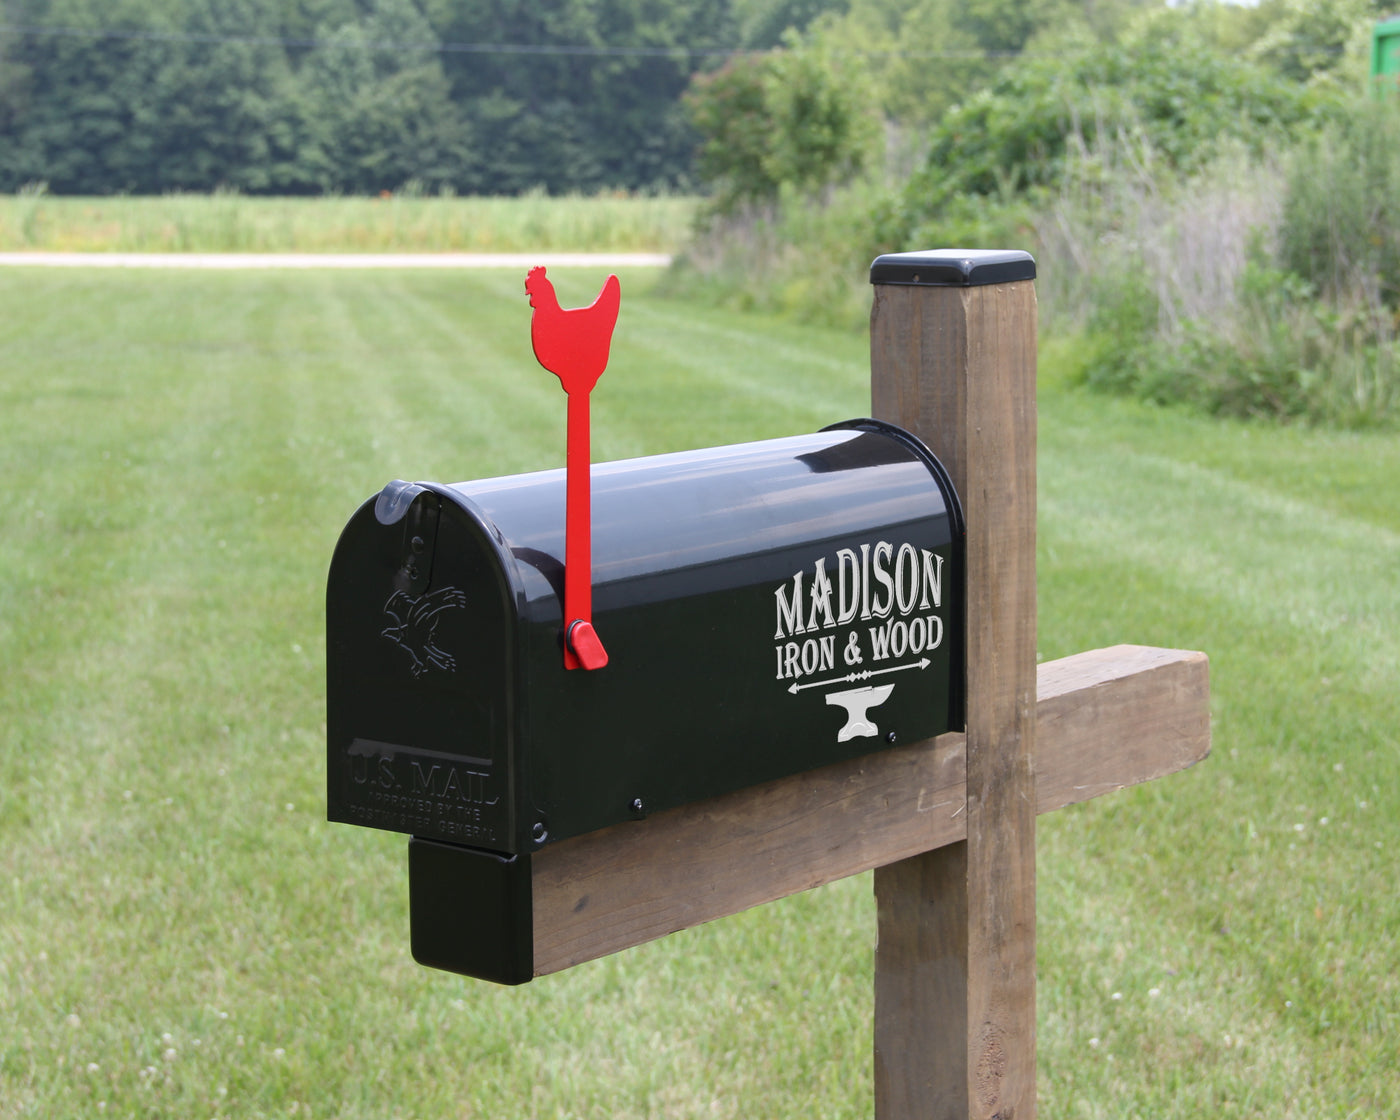 Chicken Mailbox Flag - Madison Iron and Wood - Mailbox Post Decor - metal outdoor decor - Steel deocrations - american made products - veteran owned business products - fencing decorations - fencing supplies - custom wall decorations - personalized wall signs - steel - decorative post caps - steel post caps - metal post caps - brackets - structural brackets - home improvement - easter - easter decorations - easter gift - easter yard decor